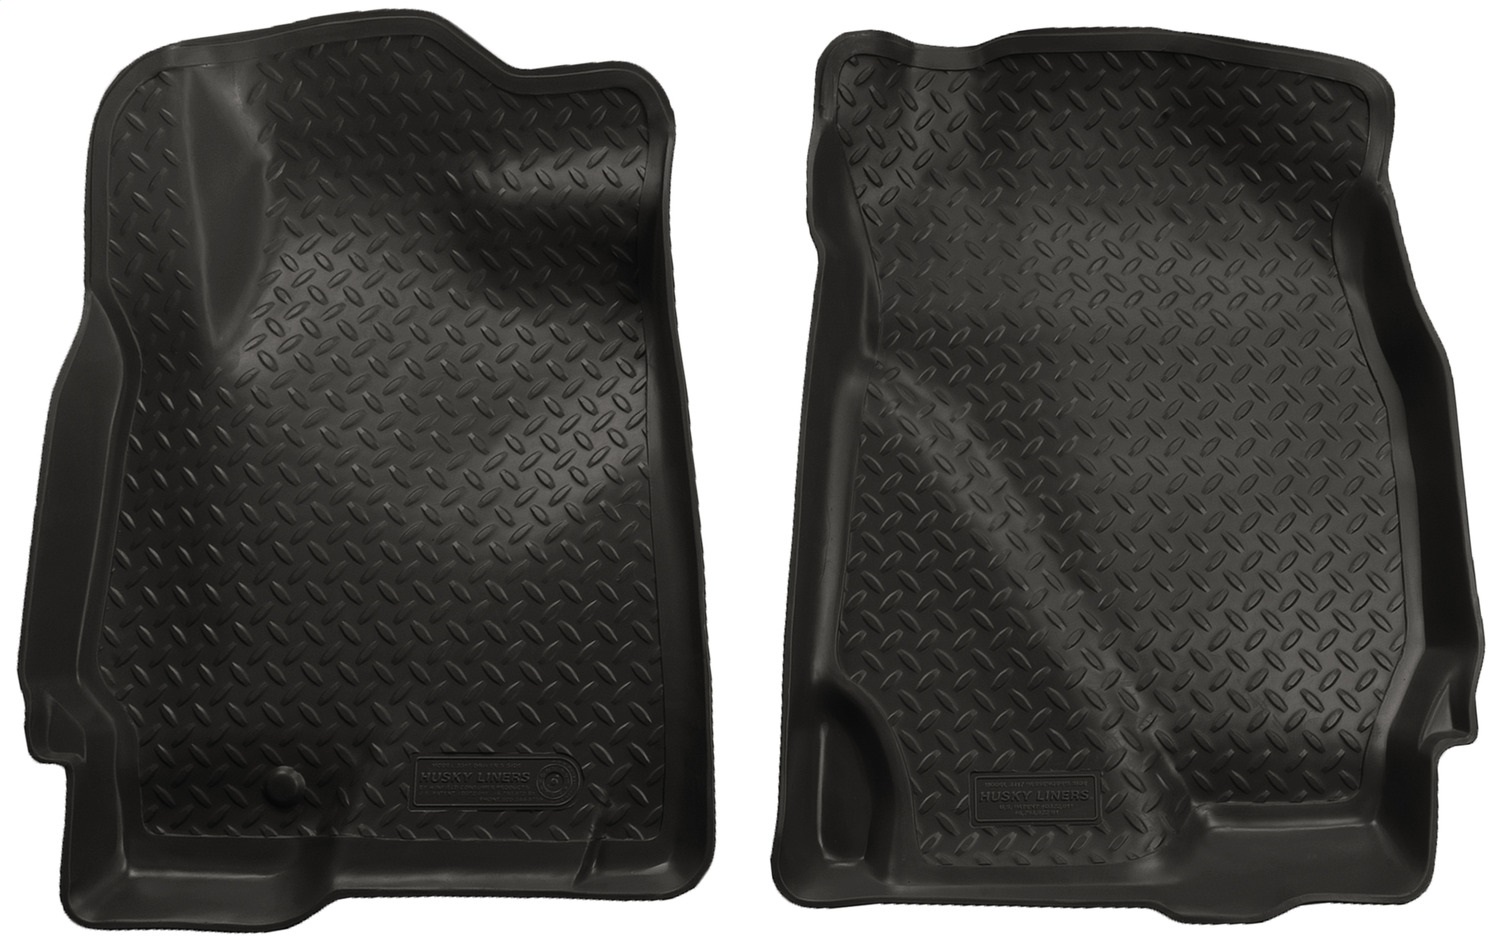 Husky Liners Husky Liners 33171 Classic Style; Floor Liner Fits 05-08 Escape Mariner Tribute